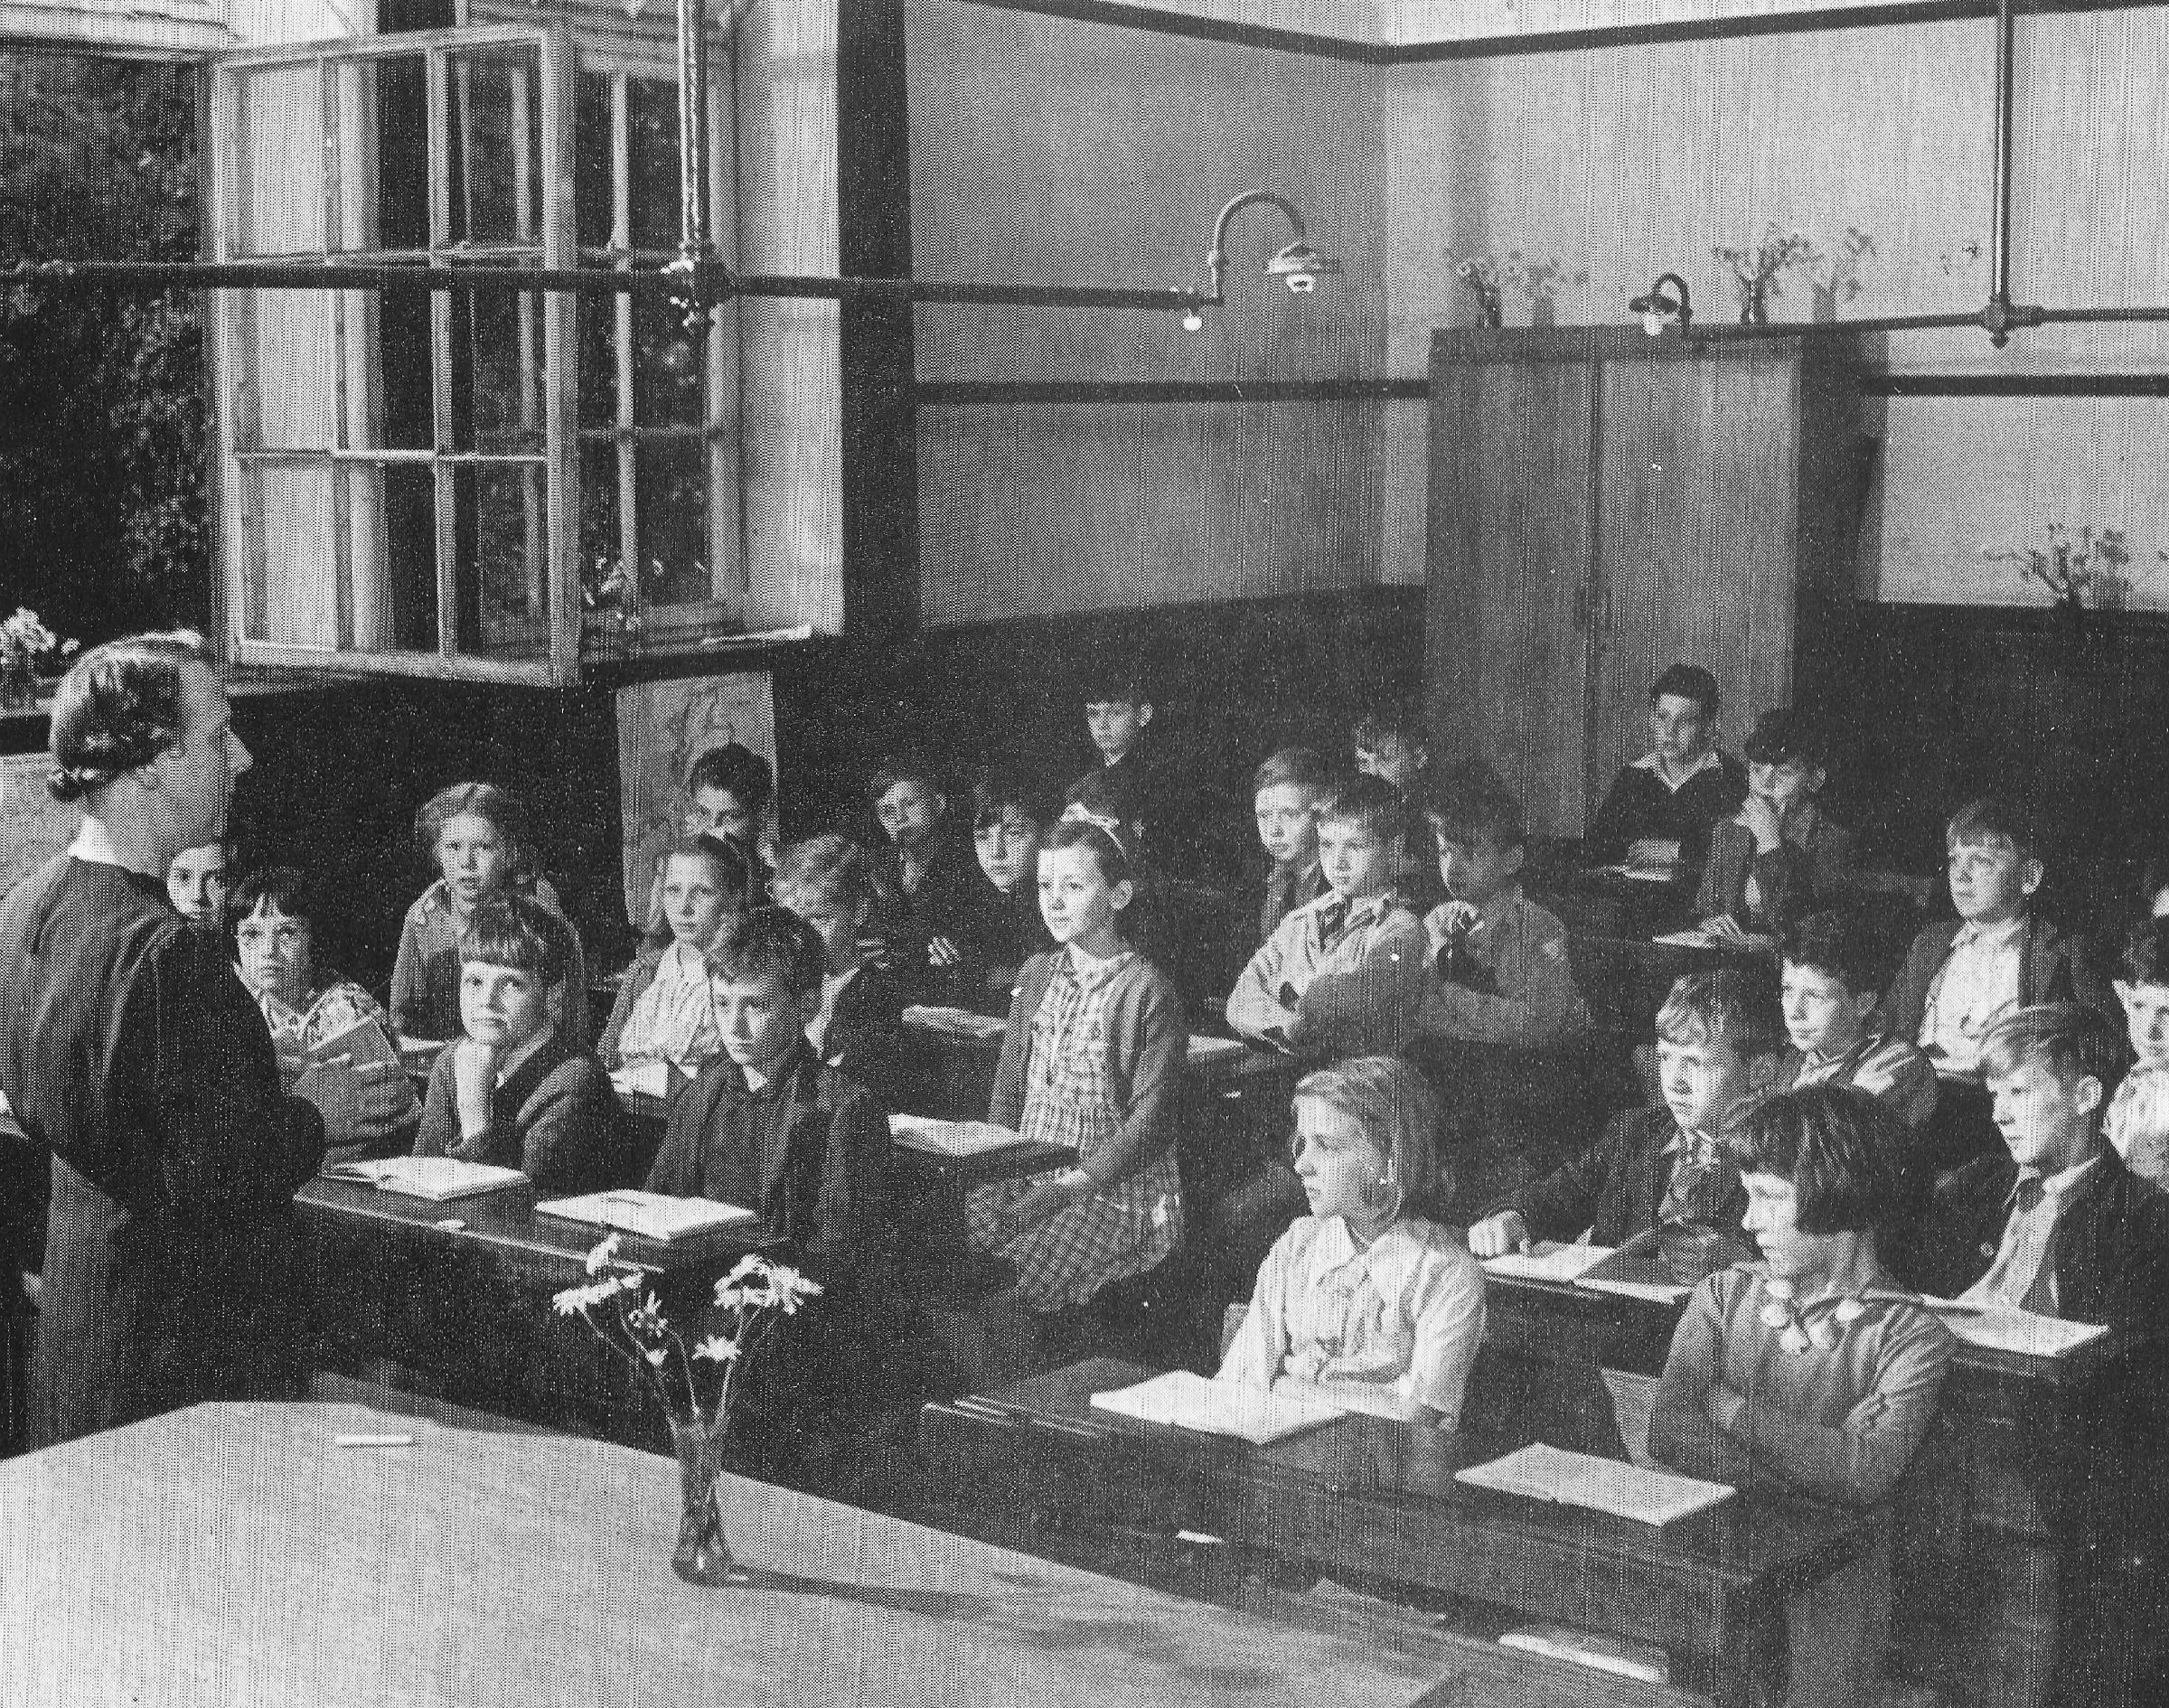 The National School in Lobards Wynd, with flowers on the teachers desk and the overhead gas pipes